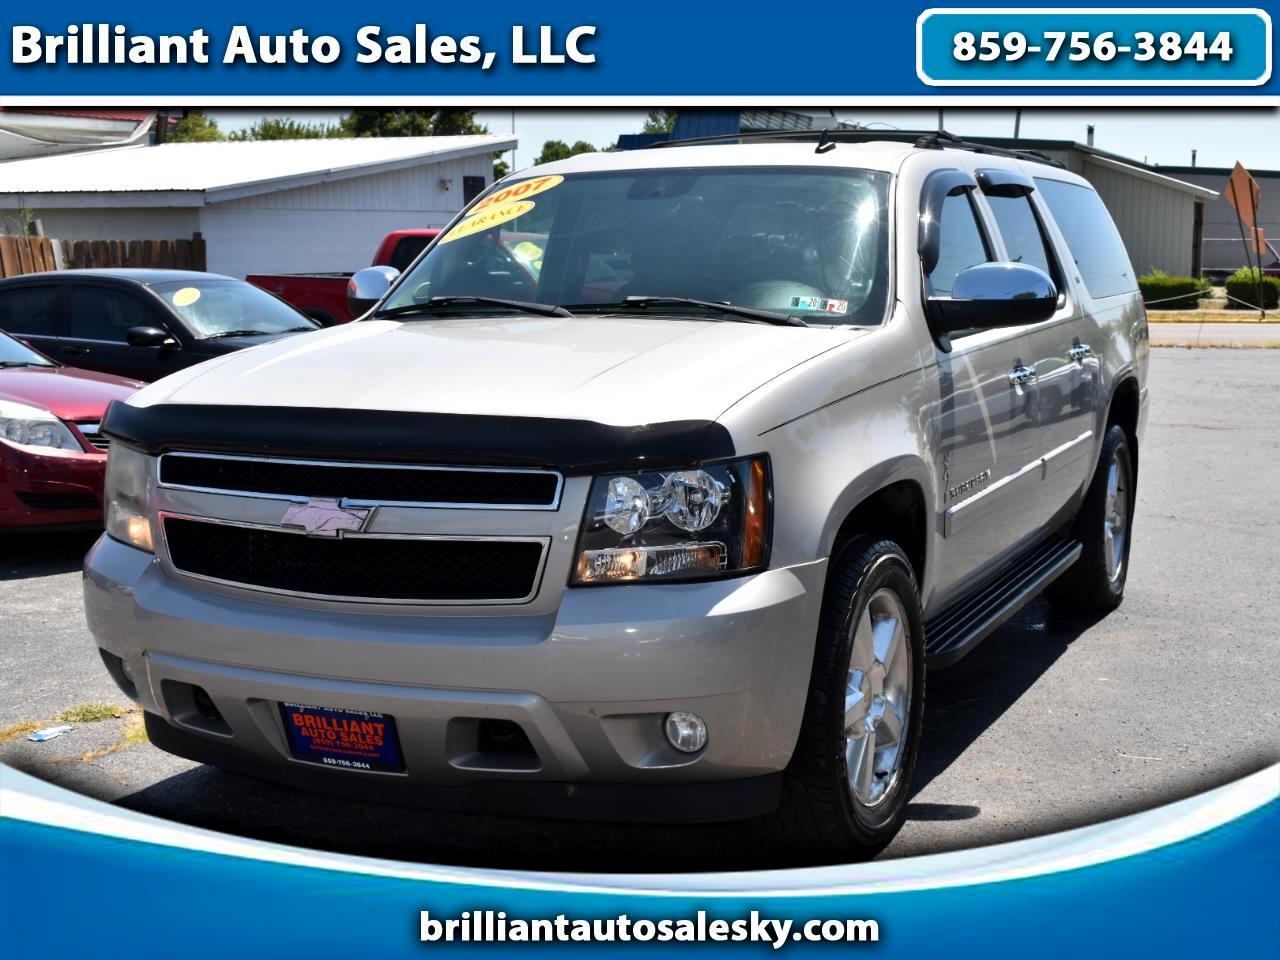 Used 2007 Chevrolet Suburban Lt2 1500 4wd For Sale In Berea